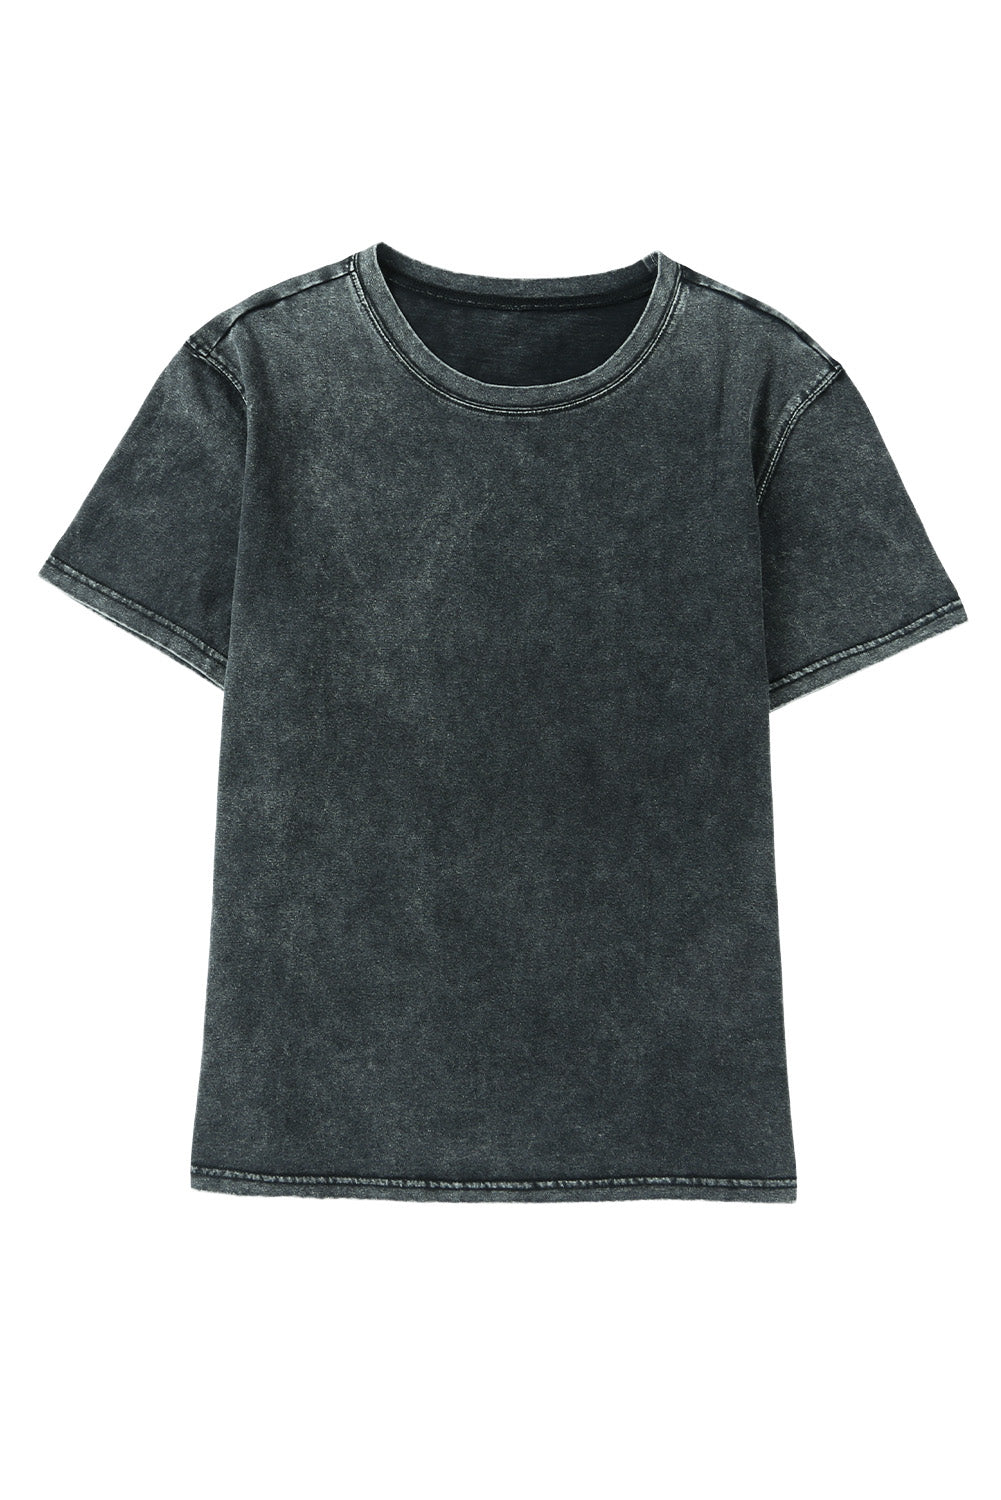 Black Mineral Washed Casual Short Sleeve Tee